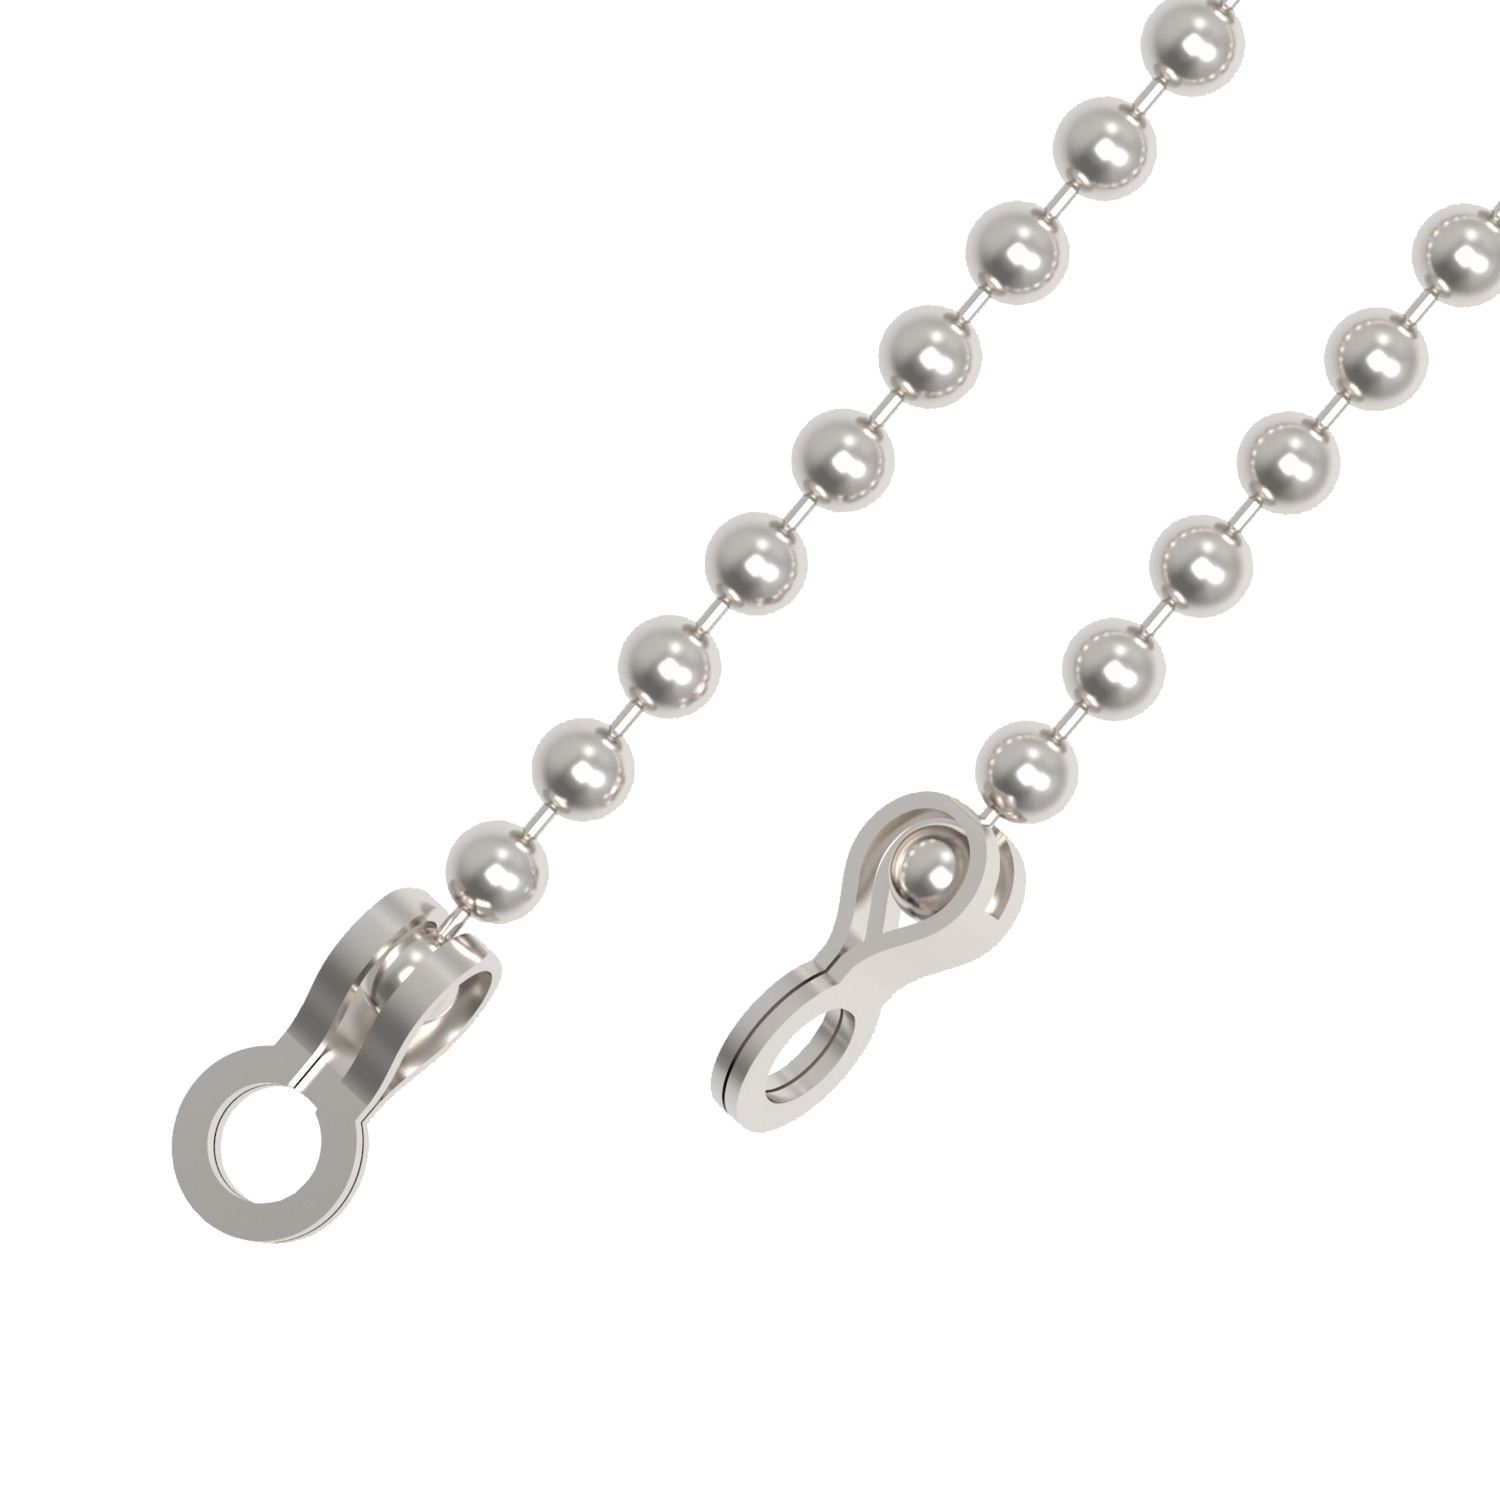 Product 33272, Lanyard - Bead Chain stainless steel / 